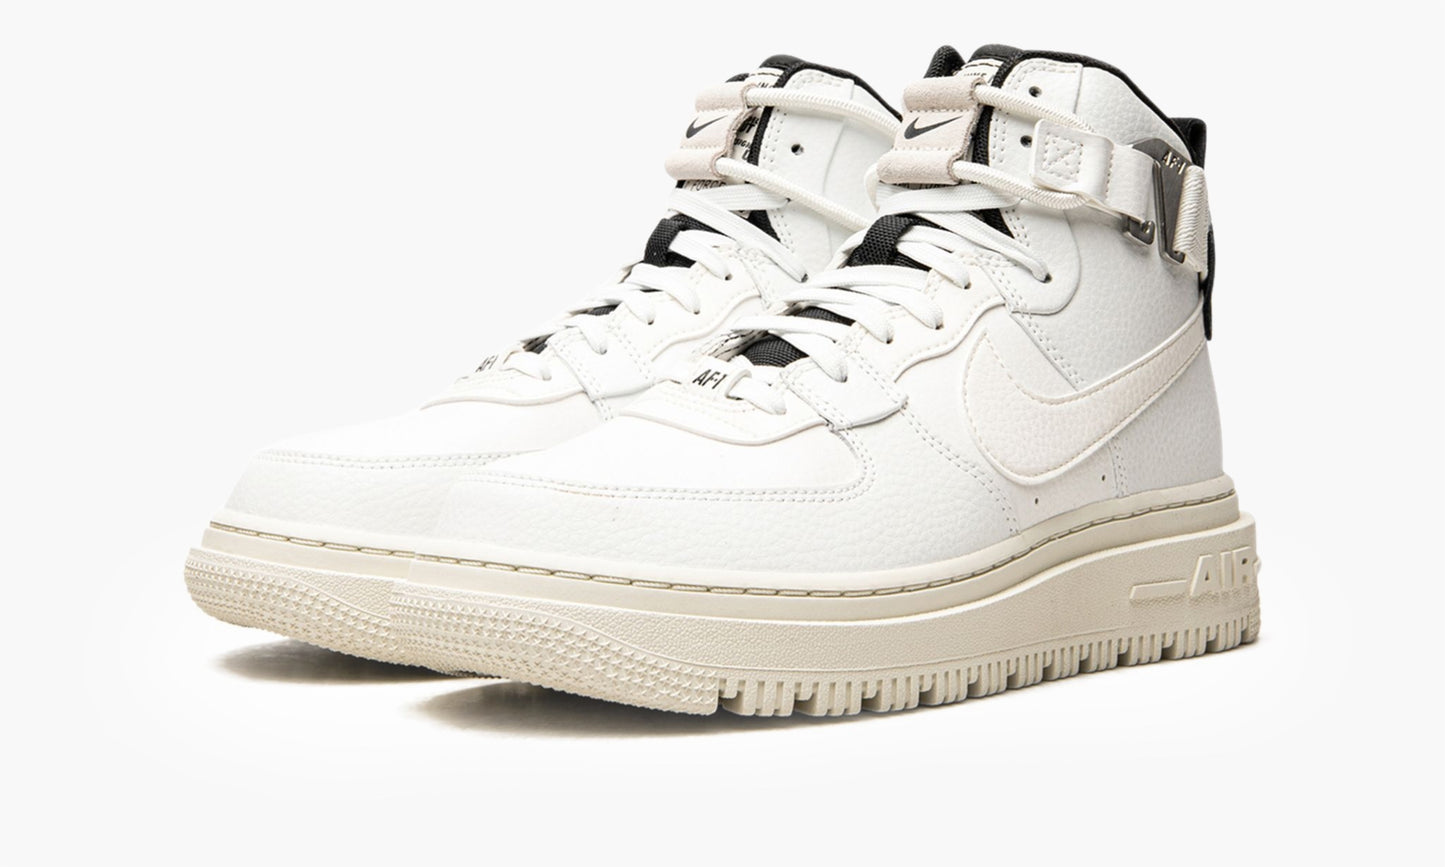 Nike Air Force 1 High WMNS Utility 2.0 Summit White - DC3584 100 | The Sortage